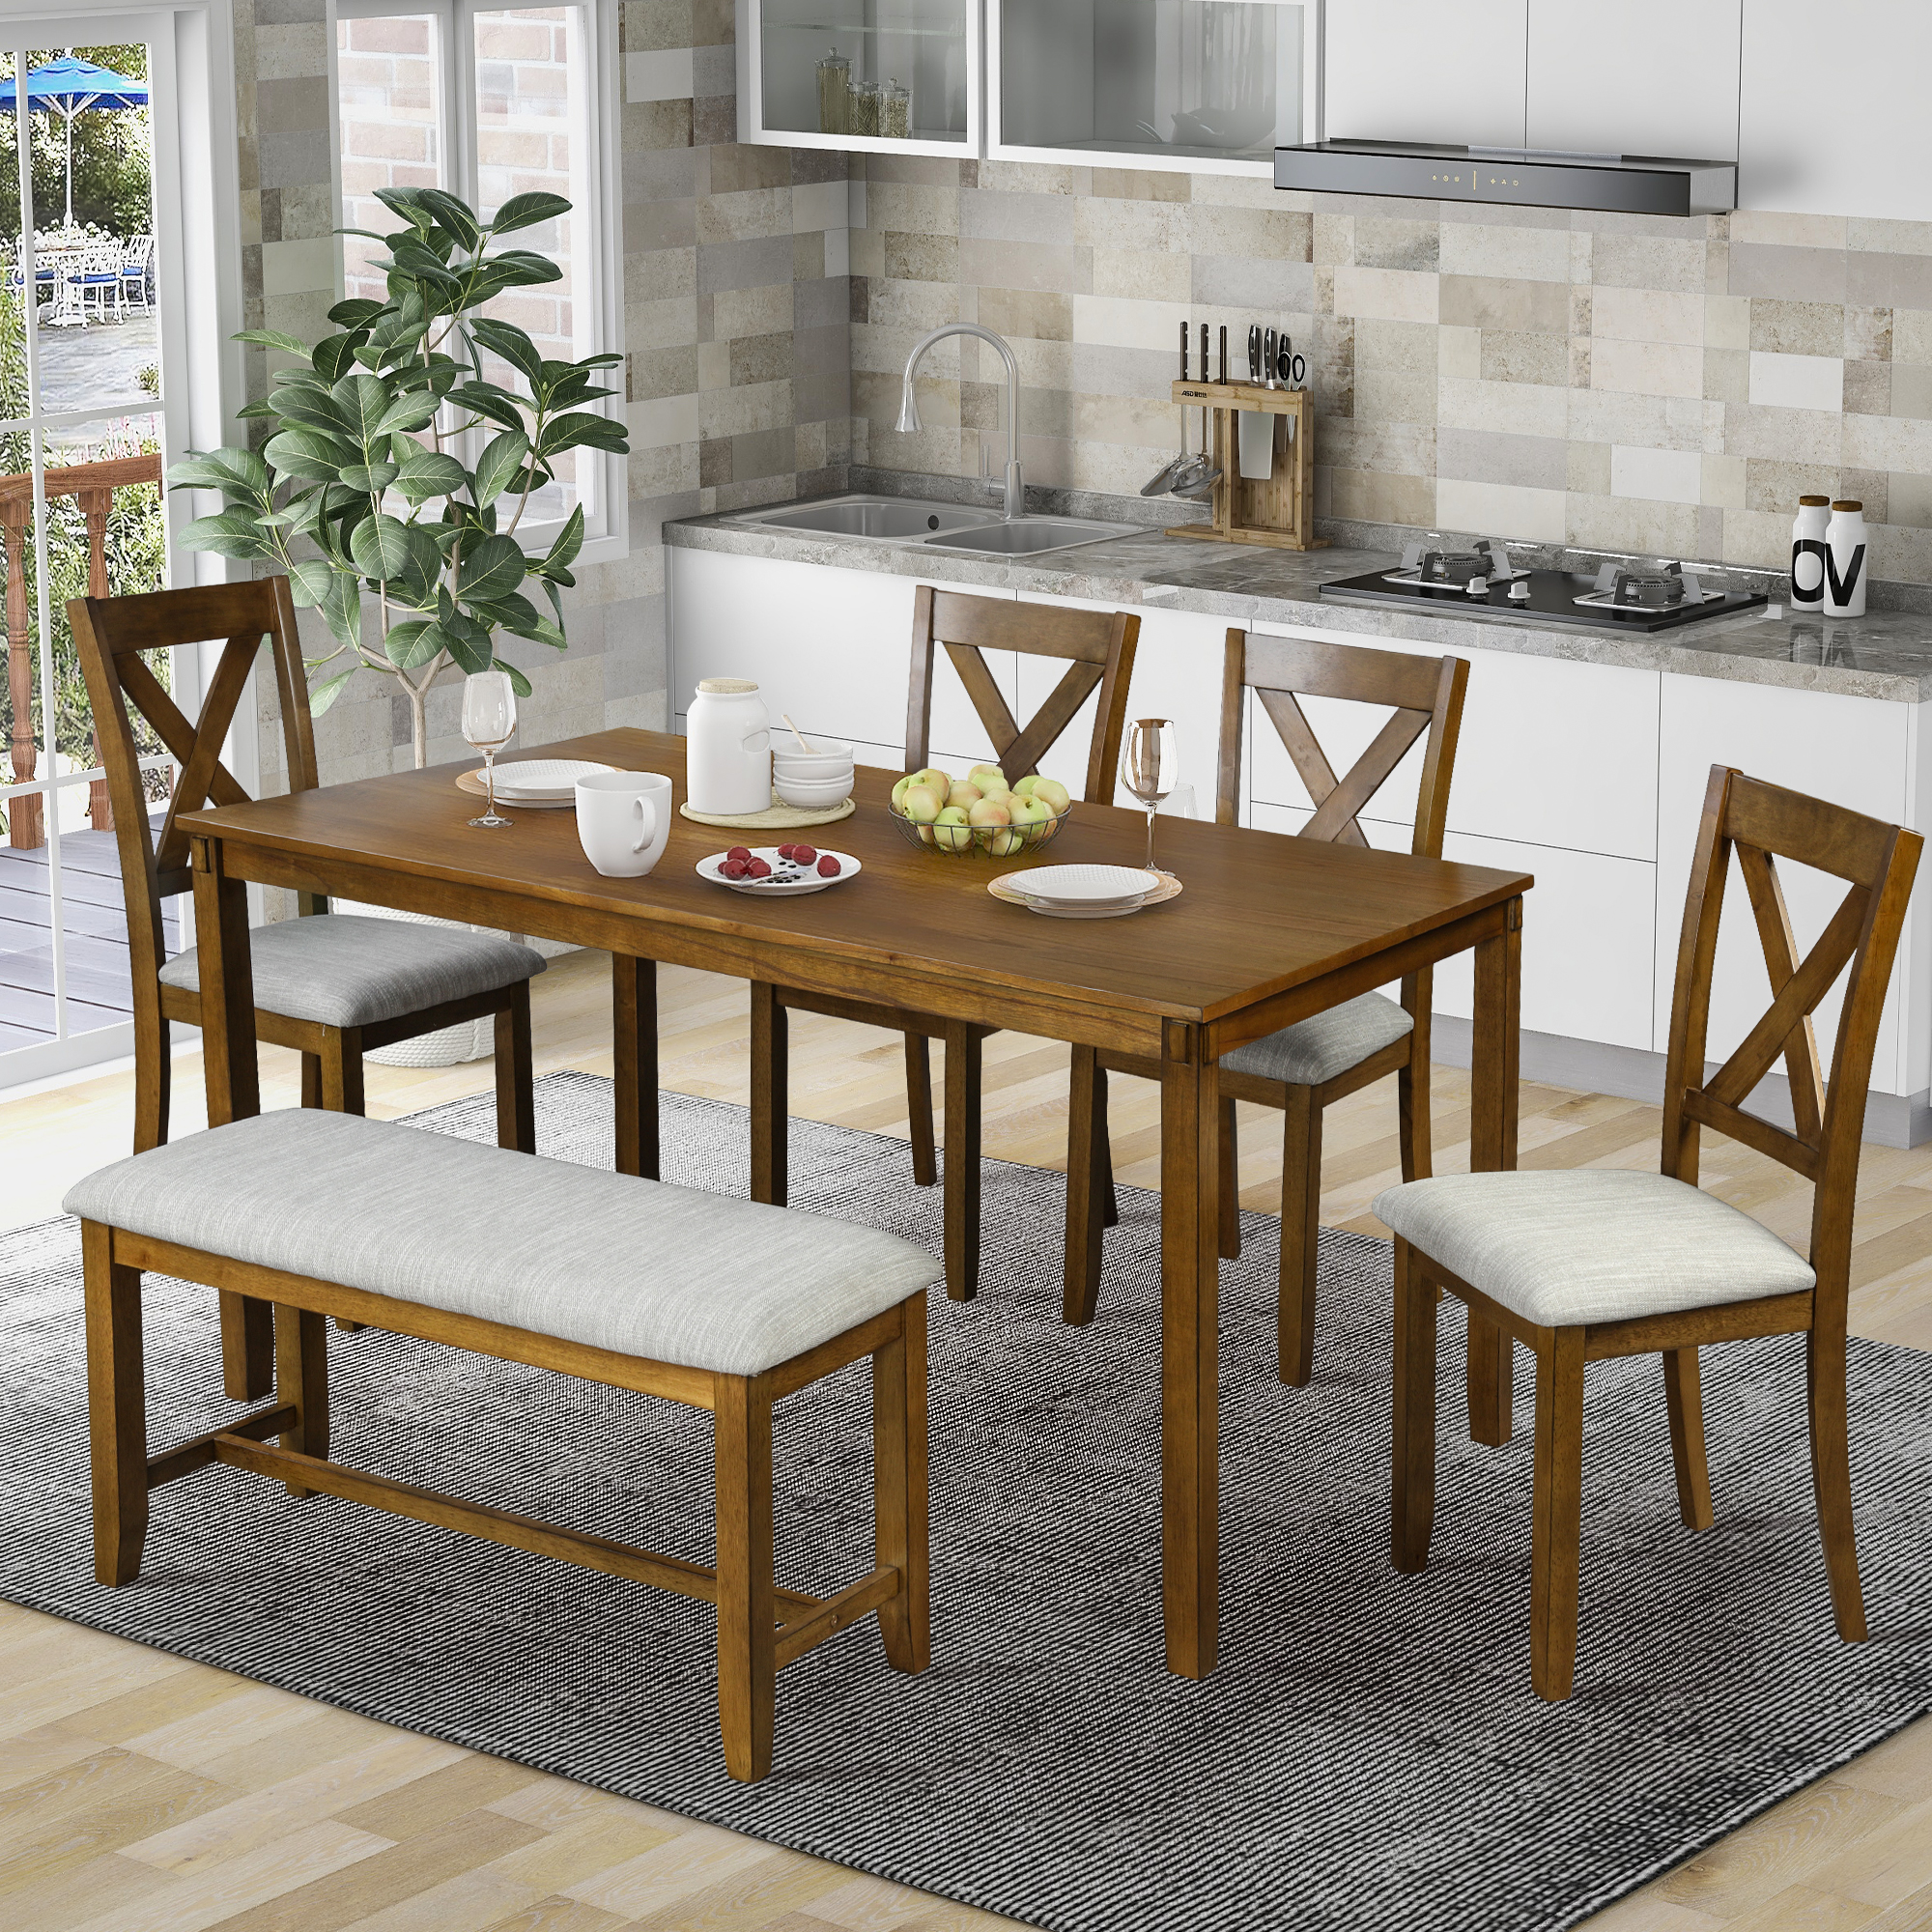 TREXM 6-Piece Kitchen Dining Table and Chair Set - ST000013AAD